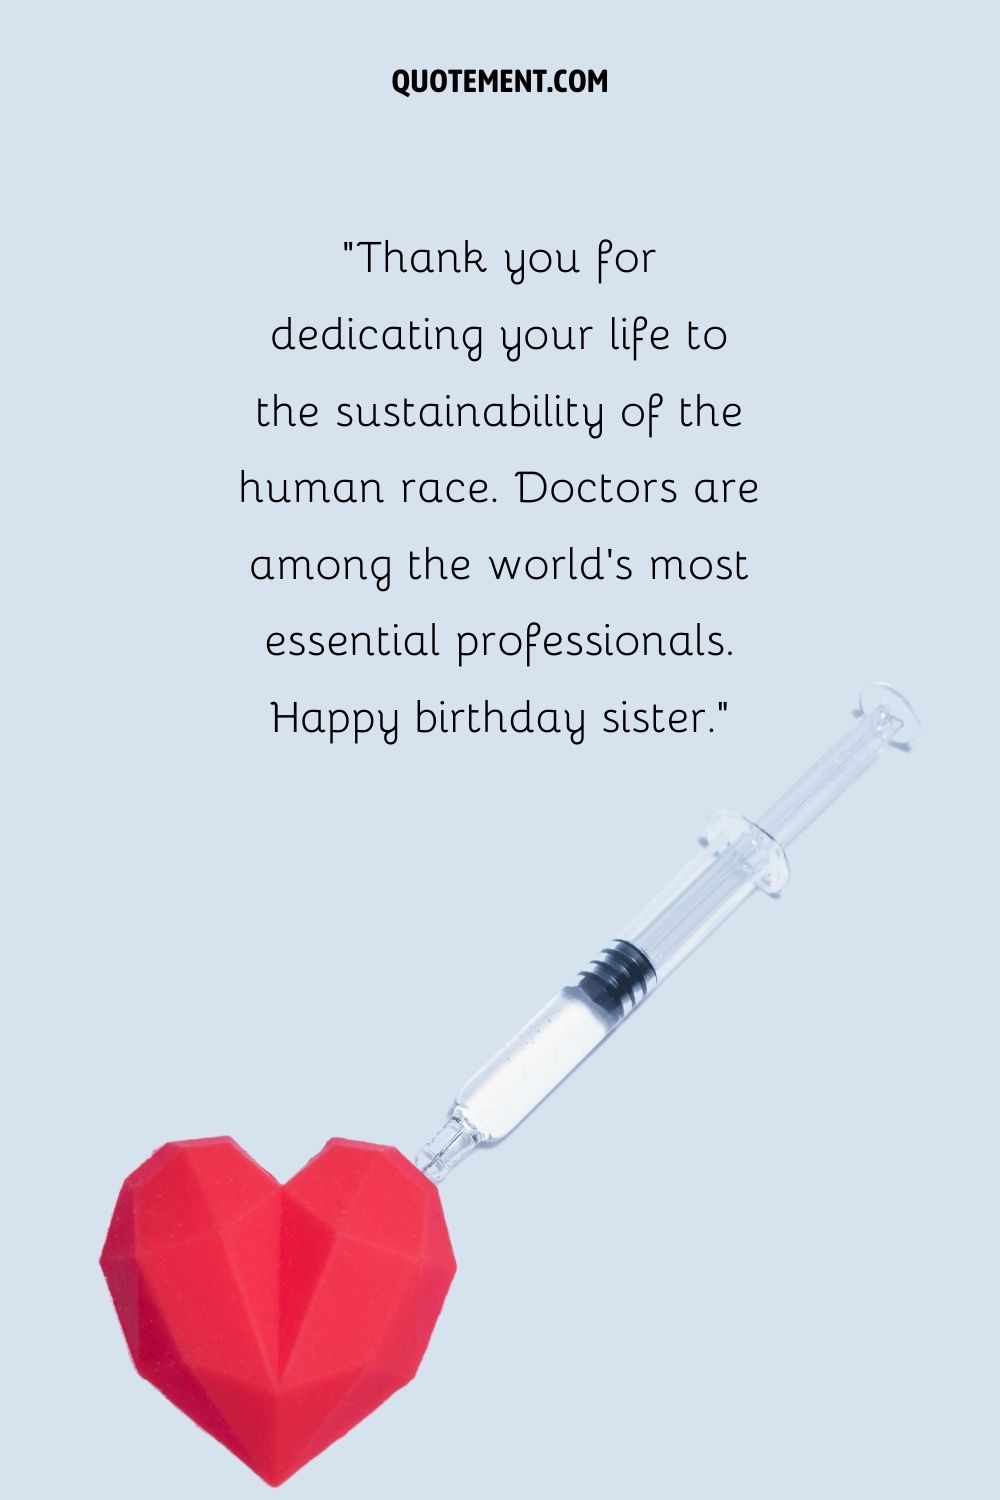 happy birthday image representing doctor sister birthday wishes